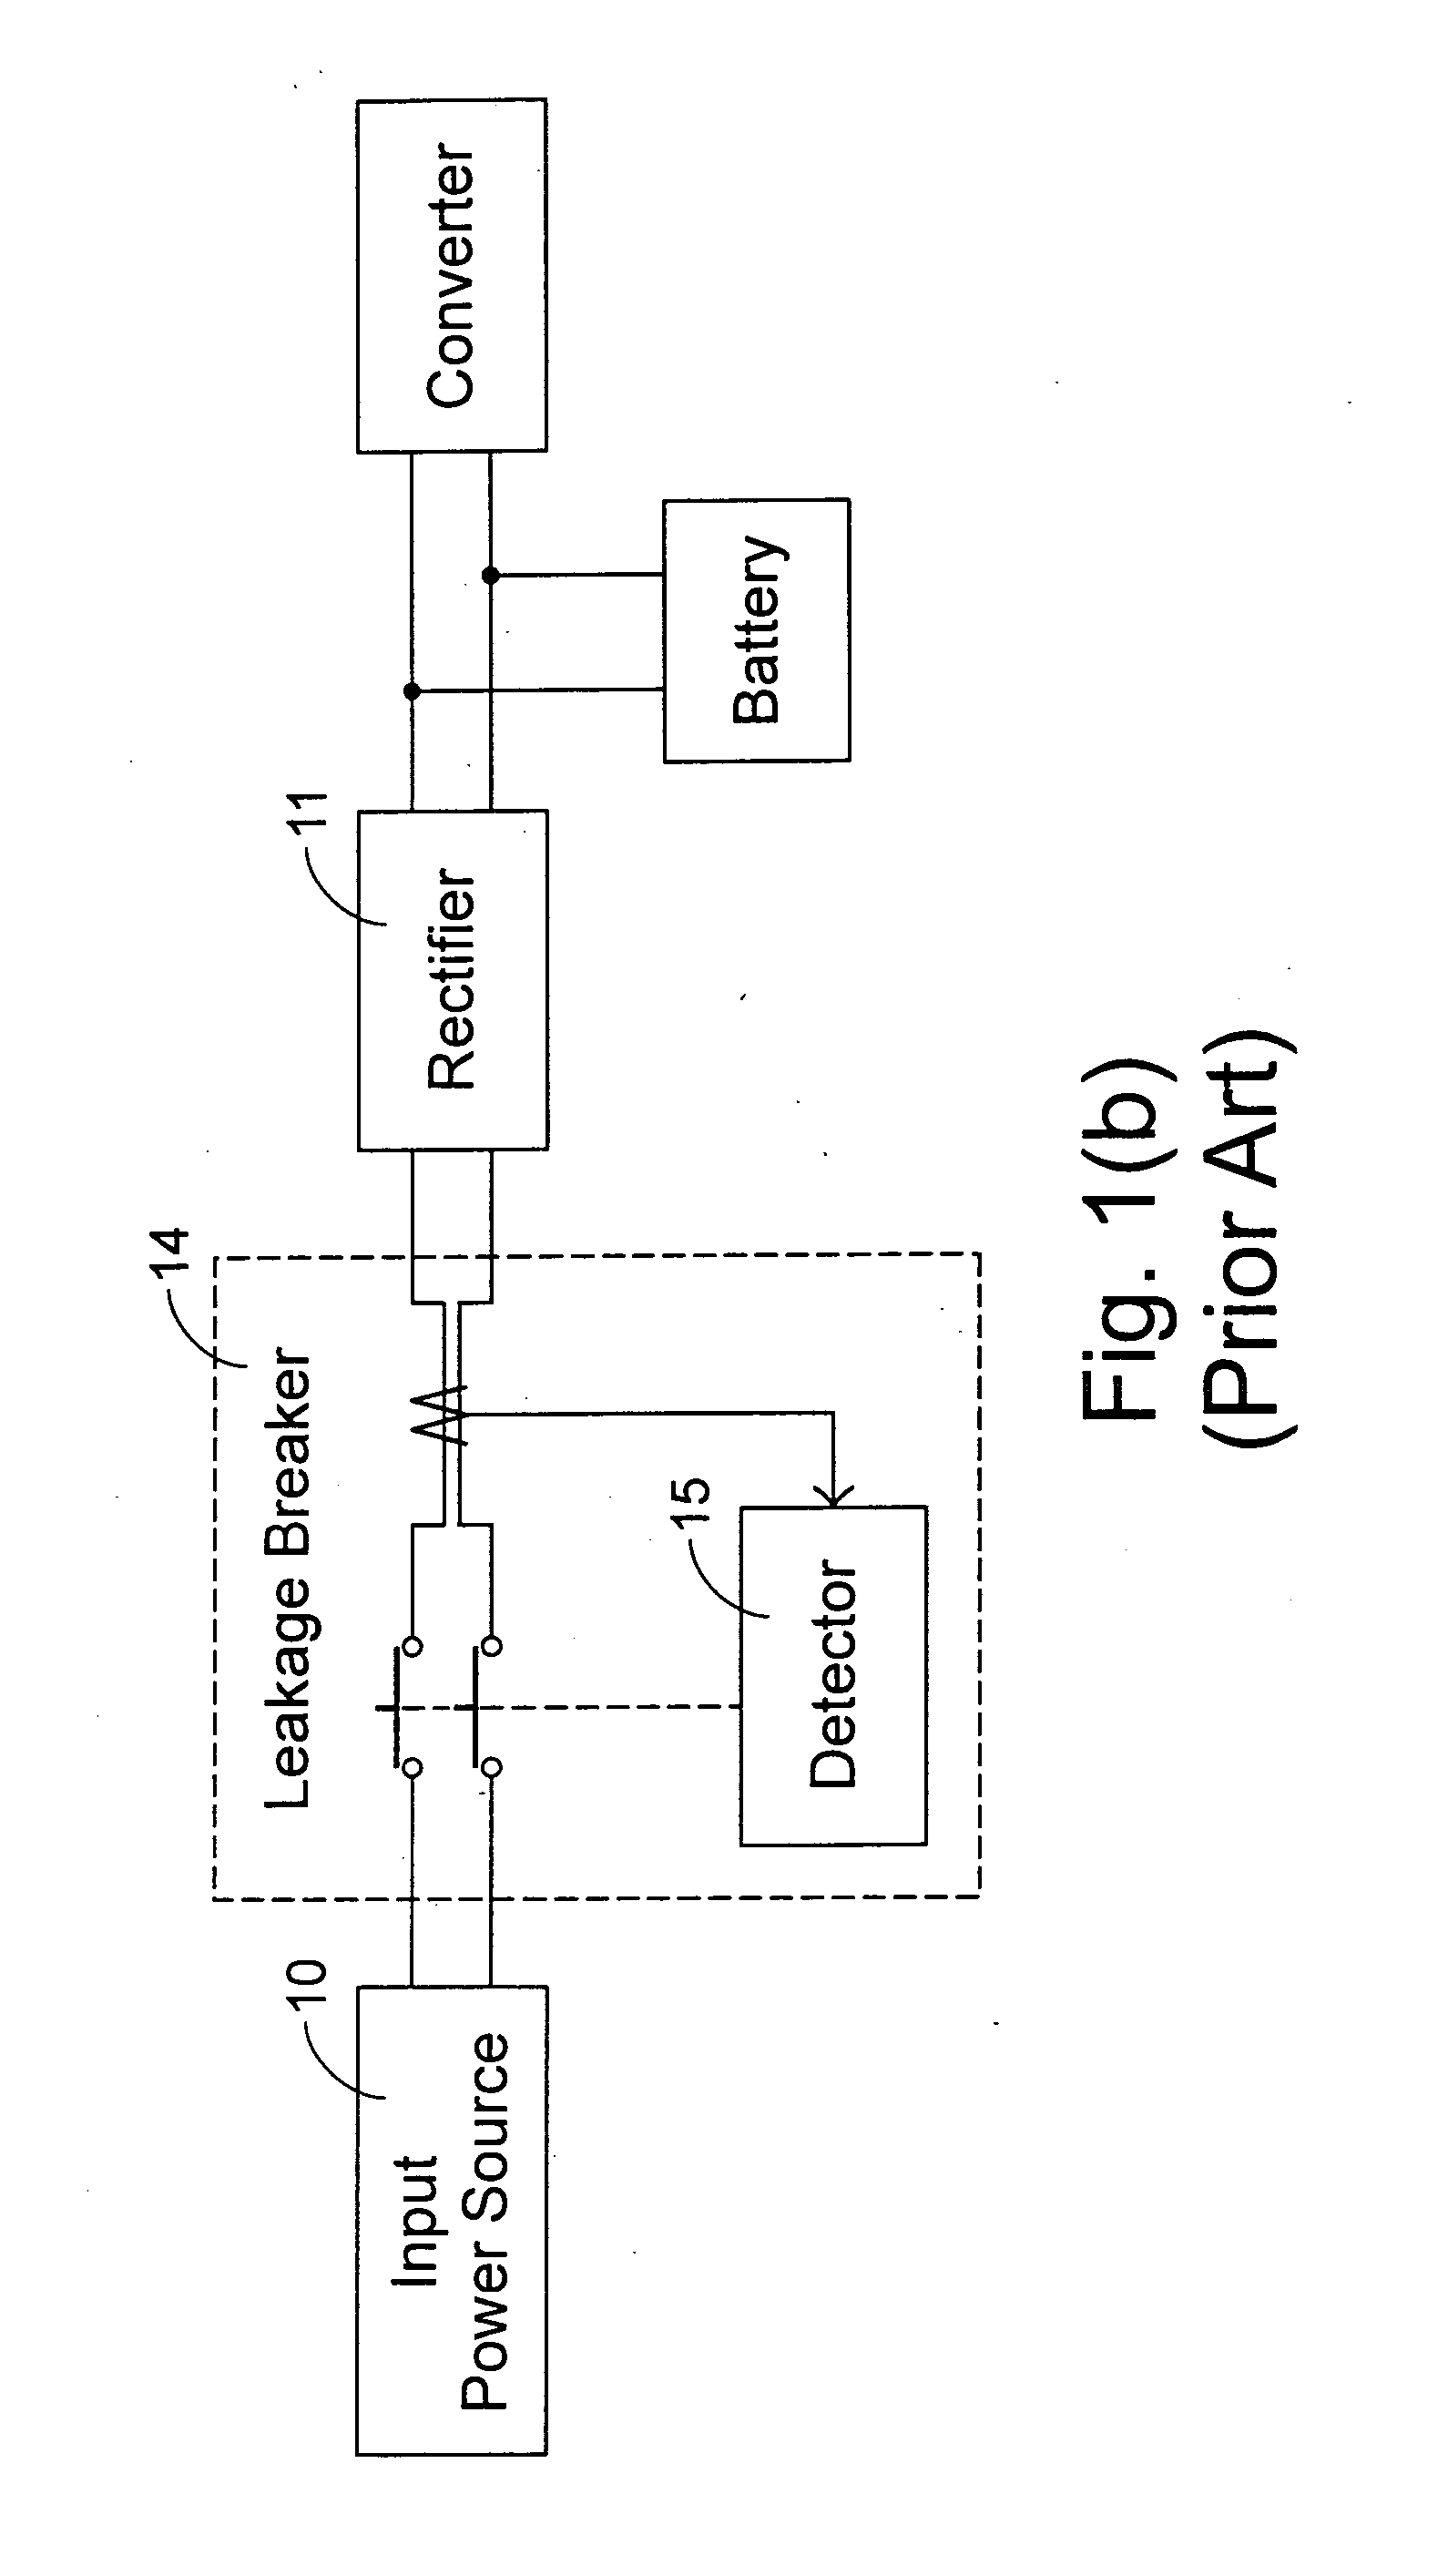 Battery ground fault detecting circuit